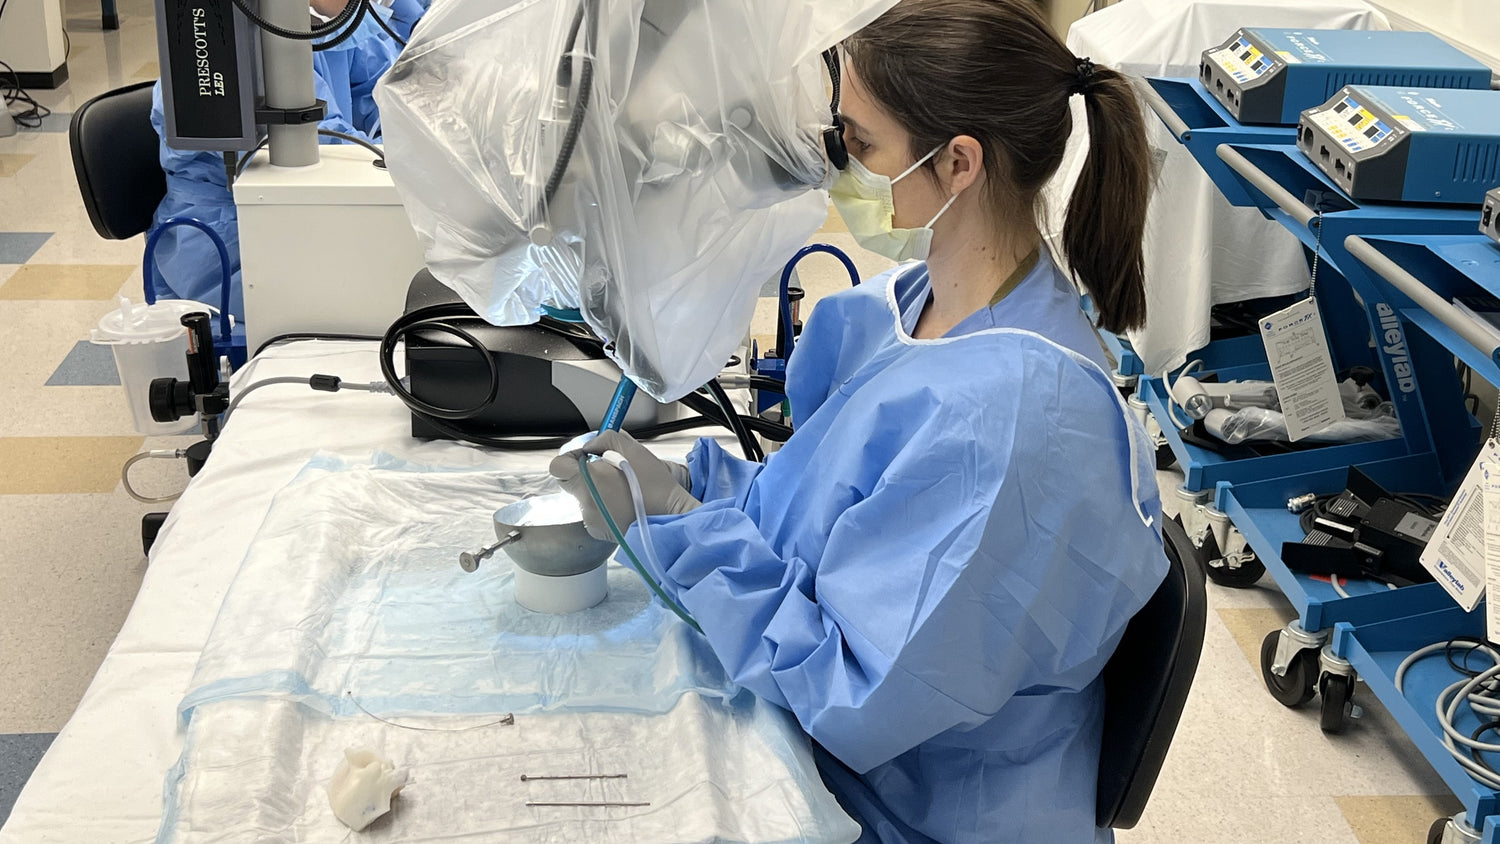 Drilling a 3D printed temporal bone during a dissection course for medical students.